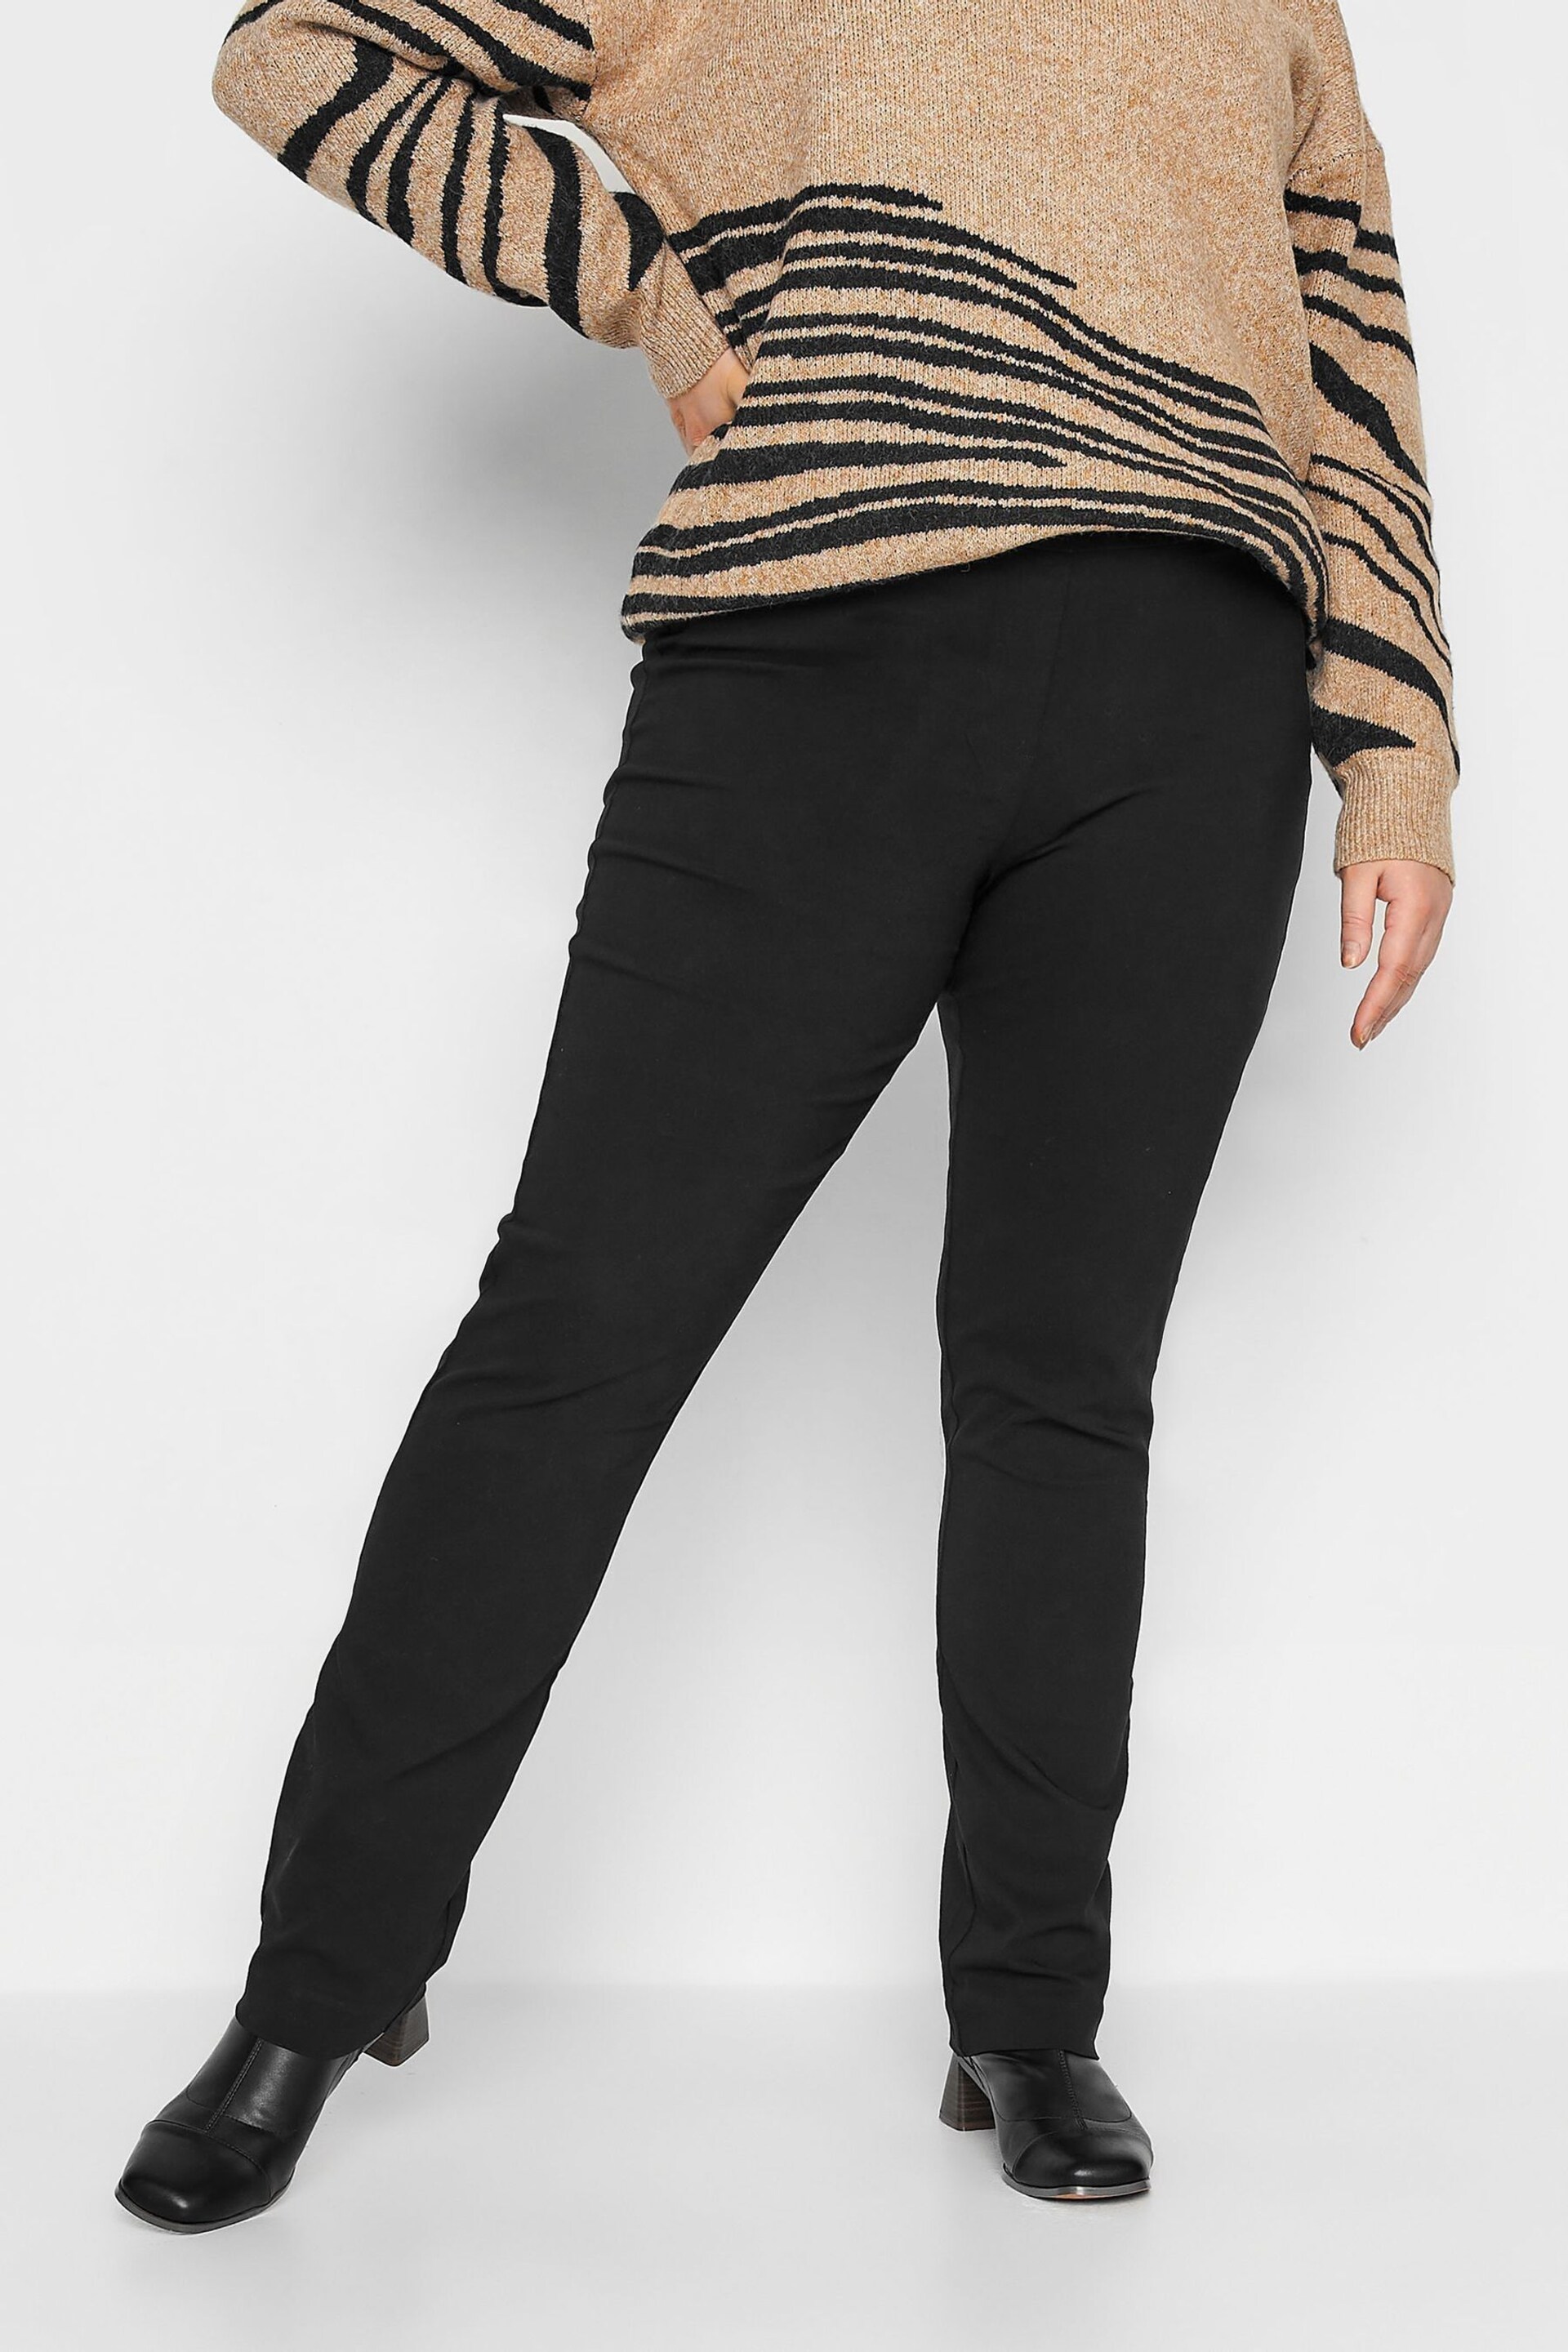 Long Tall Sally Black Stretch Straight Leg Trousers - Image 3 of 4